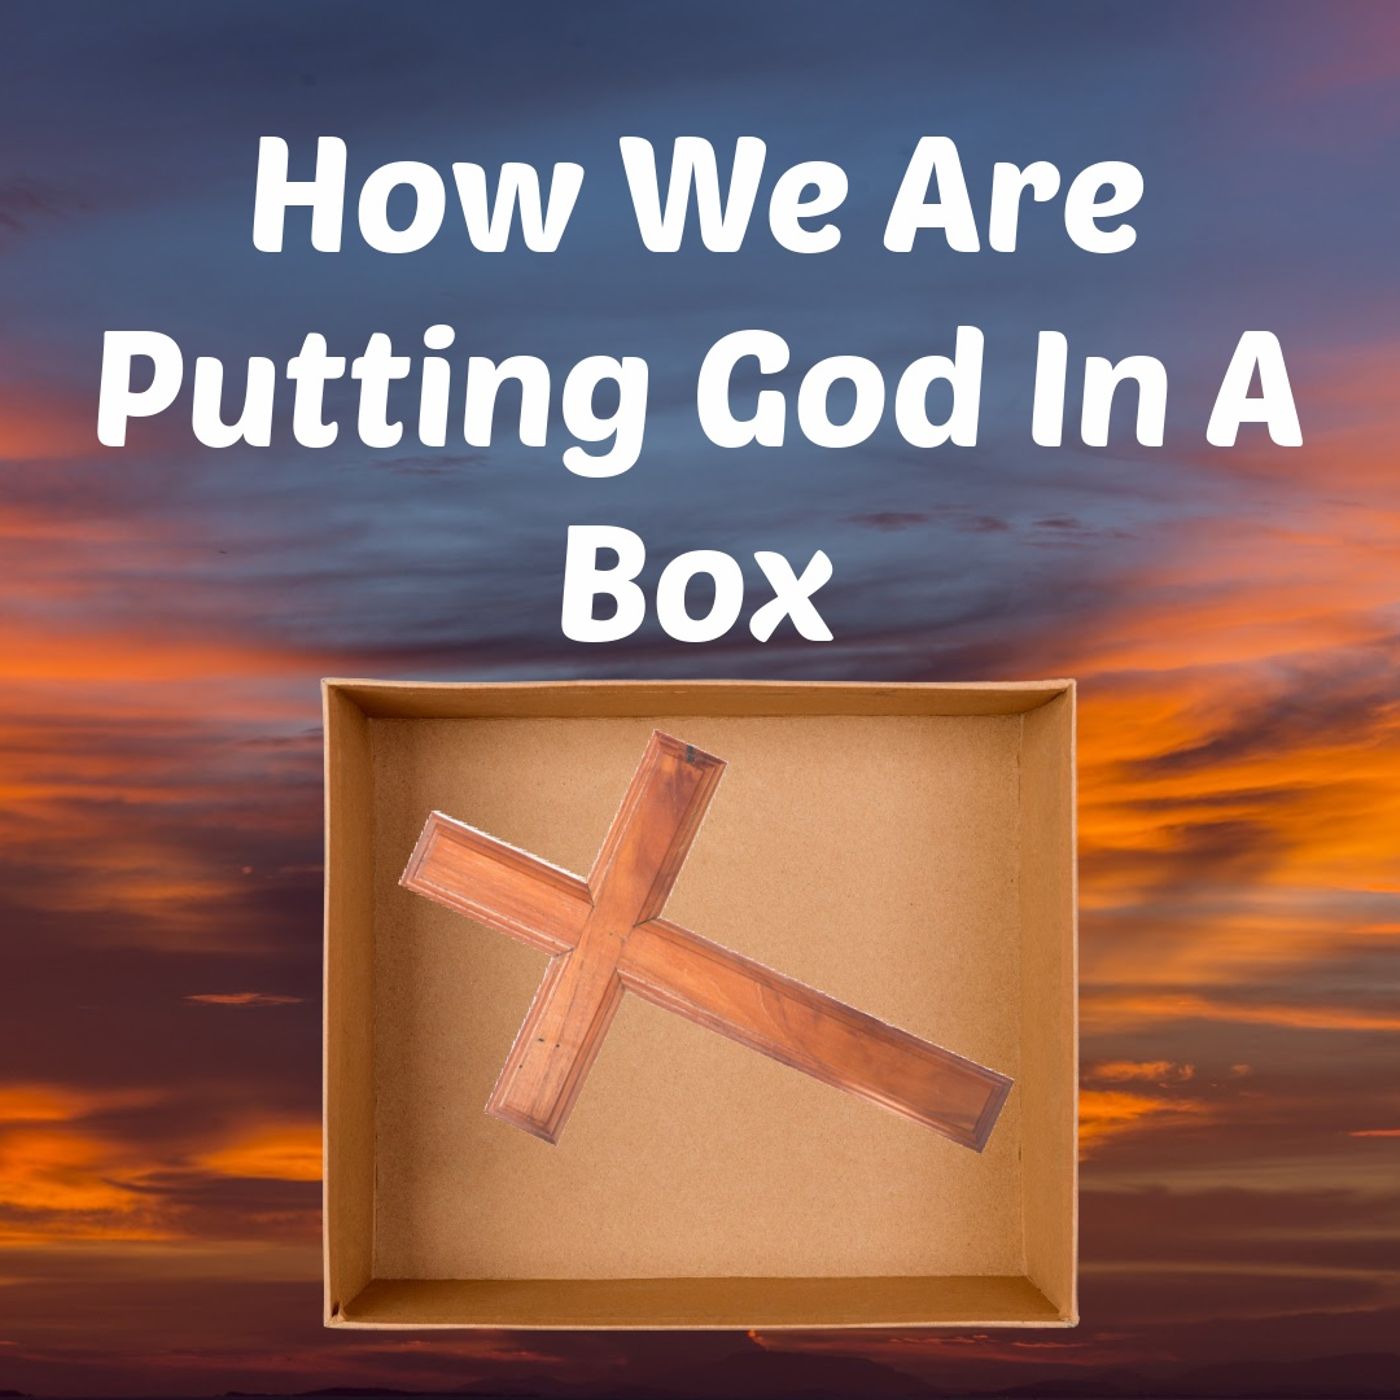 How We Are Putting God Into A Box